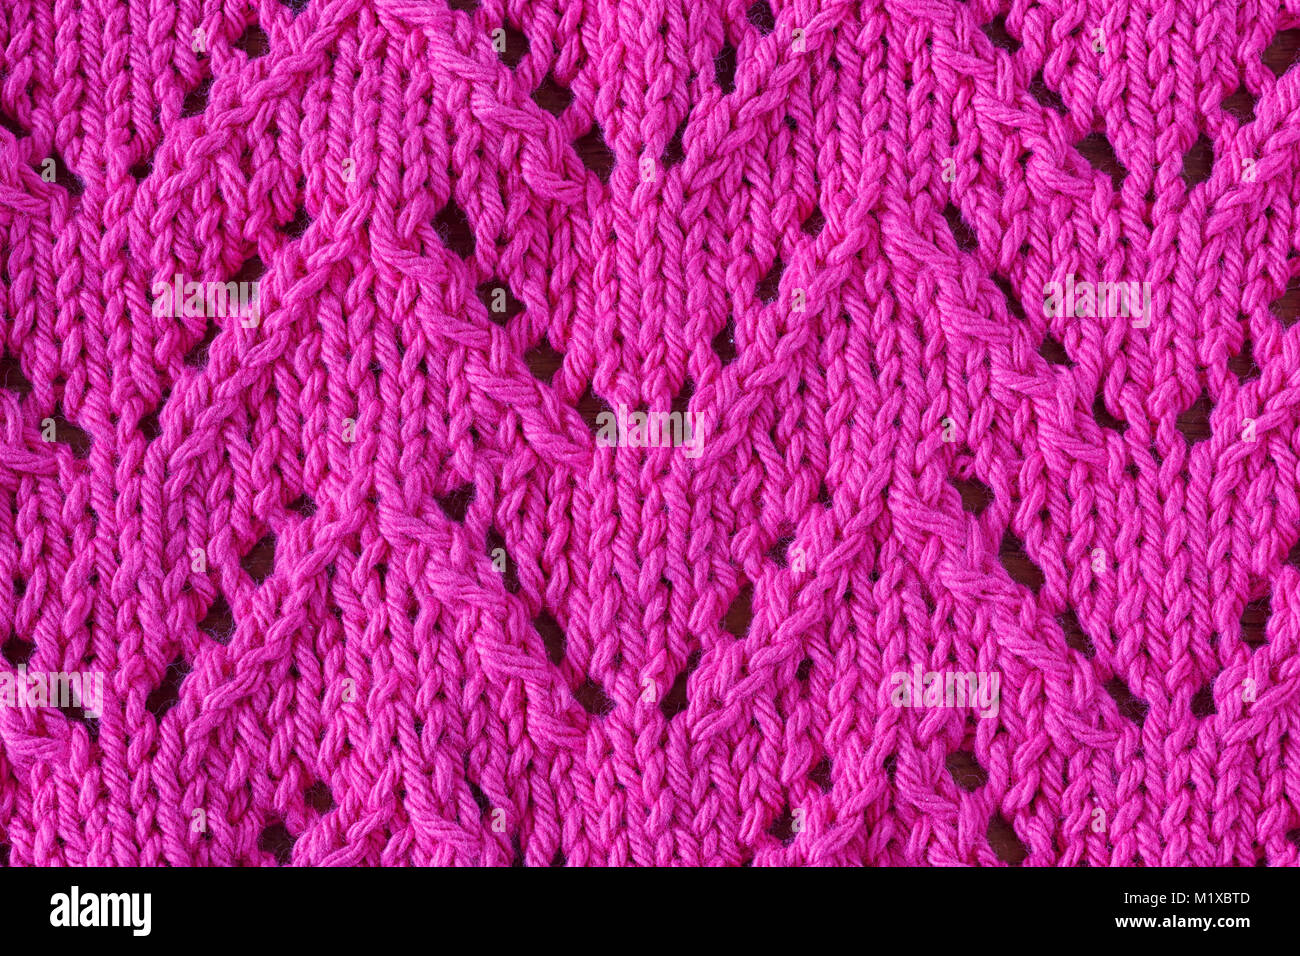 Close up of a a specialized knitting pattern. Stock Photo